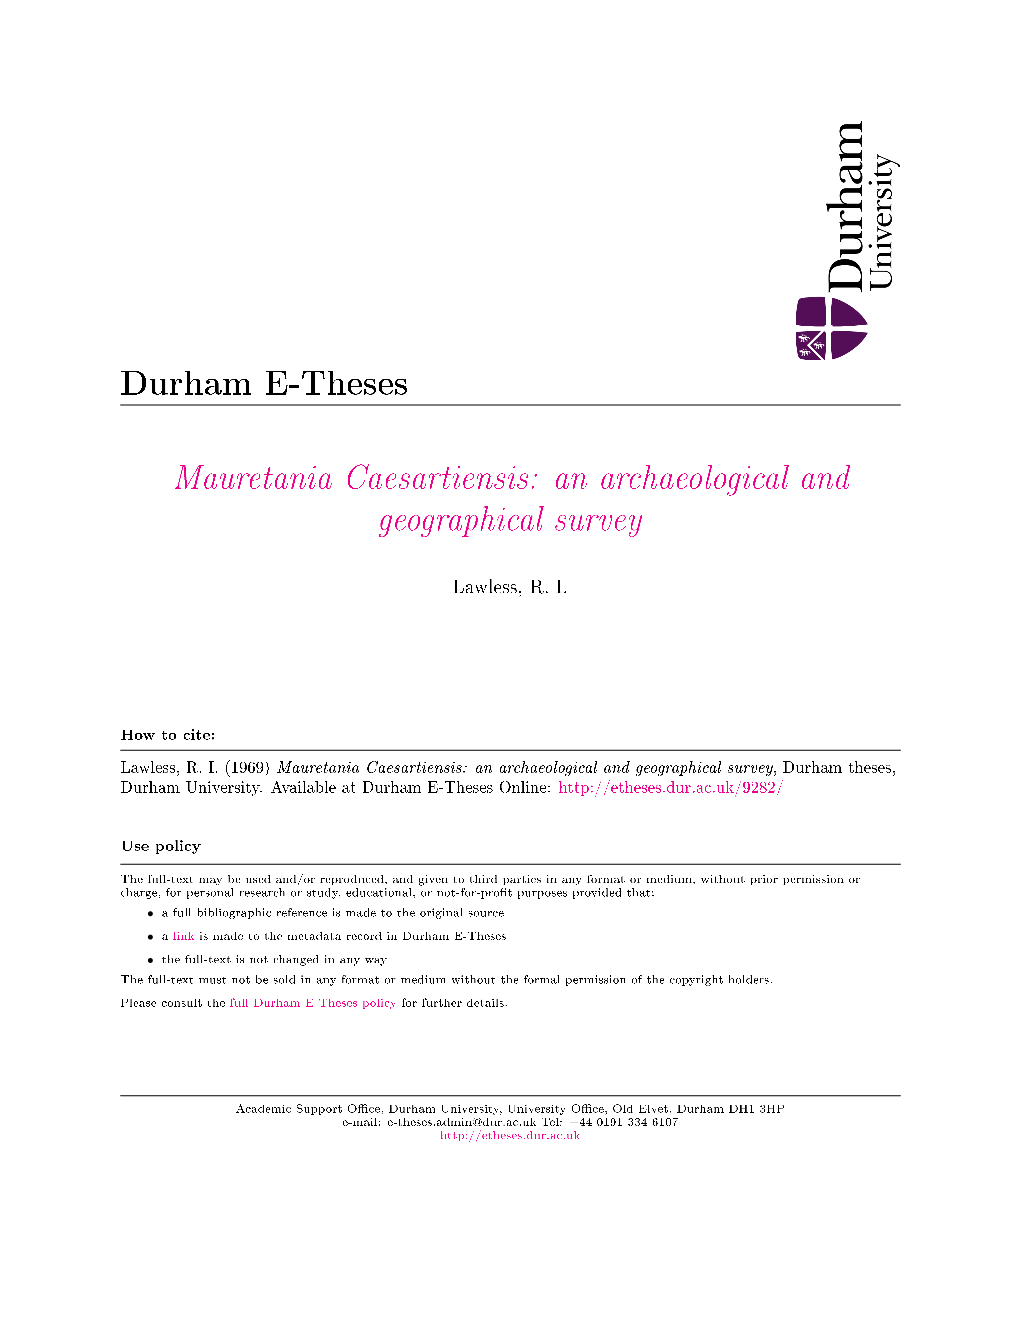 Mauretania Caesartiensis: an Archaeological and Geographical Survey